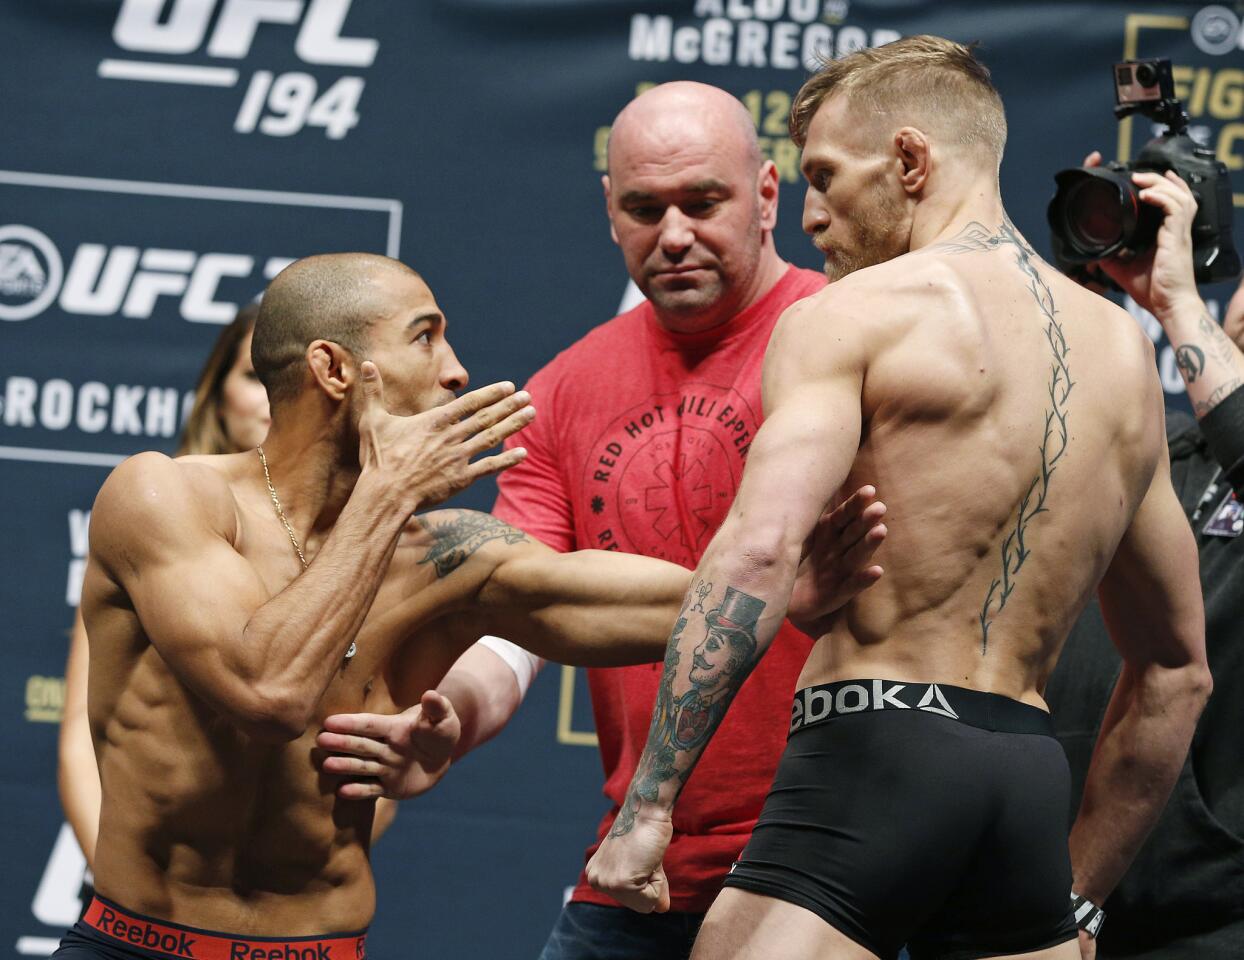 UFC president Dana White, center, stands between Conor McGregor, right, and Jose Aldo during the weigh-in for UFC 194, Friday, Dec. 11, 2015, in Las Vegas. McGregor and Aldo are scheduled to fight in a featherweight championship bout Saturday in Las Vegas. (AP Photo/John Locher)